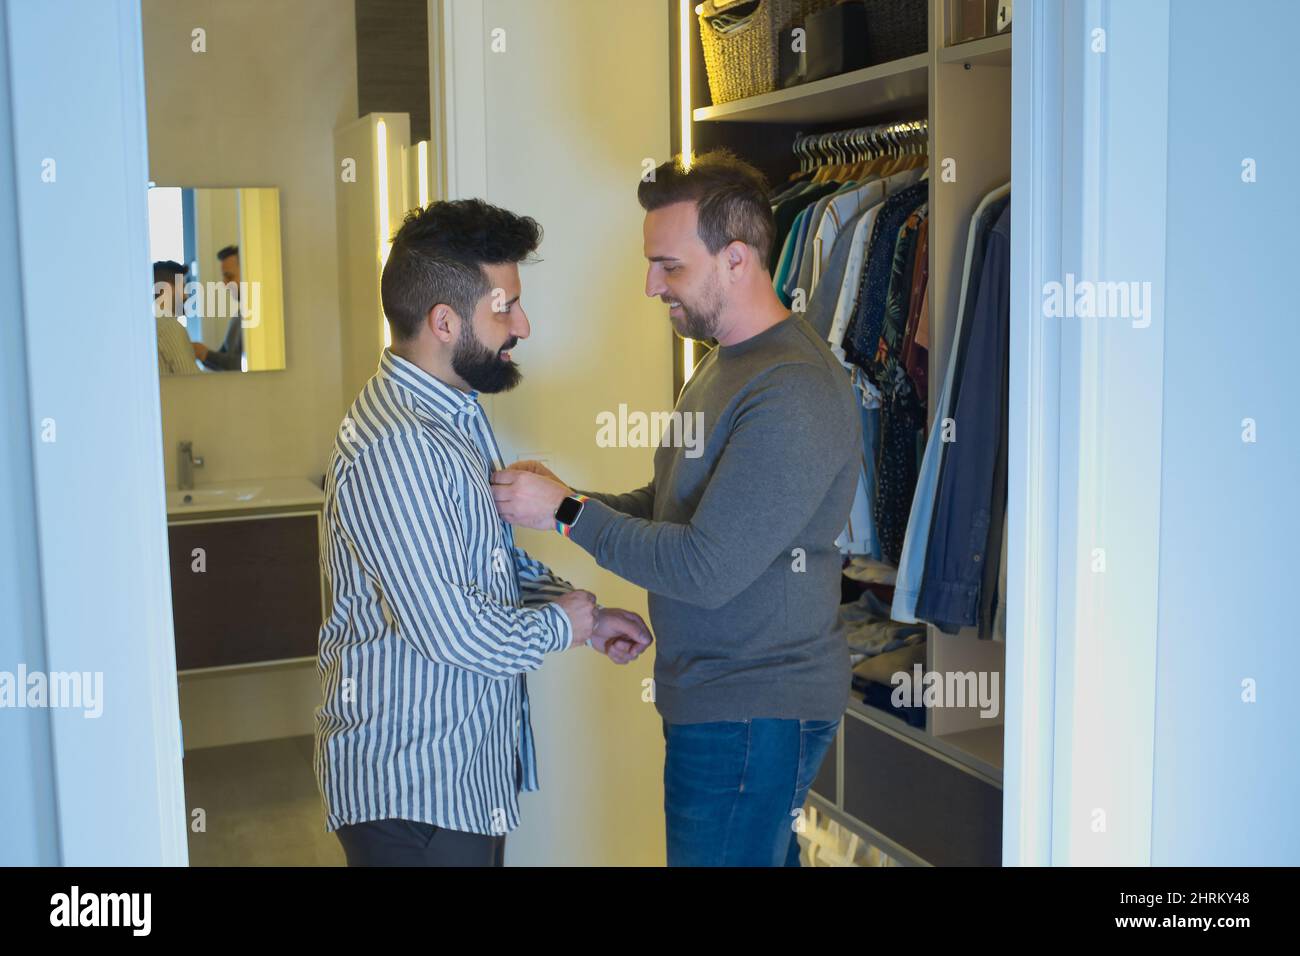 Closeup of a Gay married couple getting dressed inside the dressing room Stock Photo